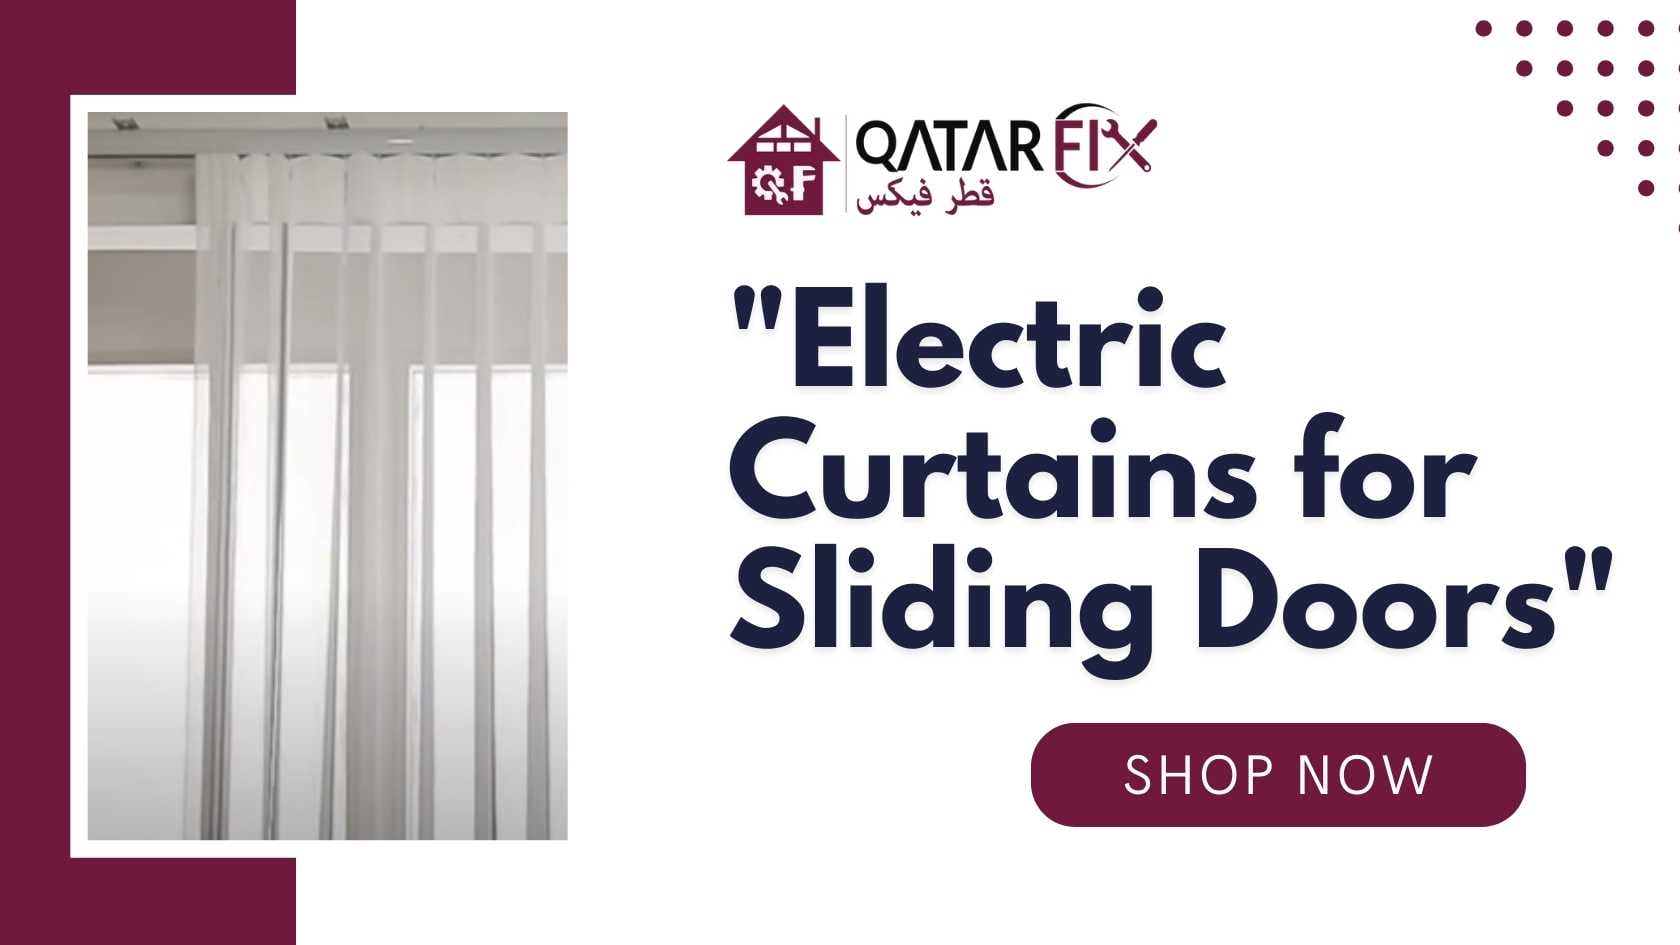 Electric Curtains for Sliding Doors: The Ultimate Convenience and Style - Qatarfix.com : Curtains,Ac,Gypsum Board,Plumbing,Electric,Construction Services Provider in Doha Qatar.